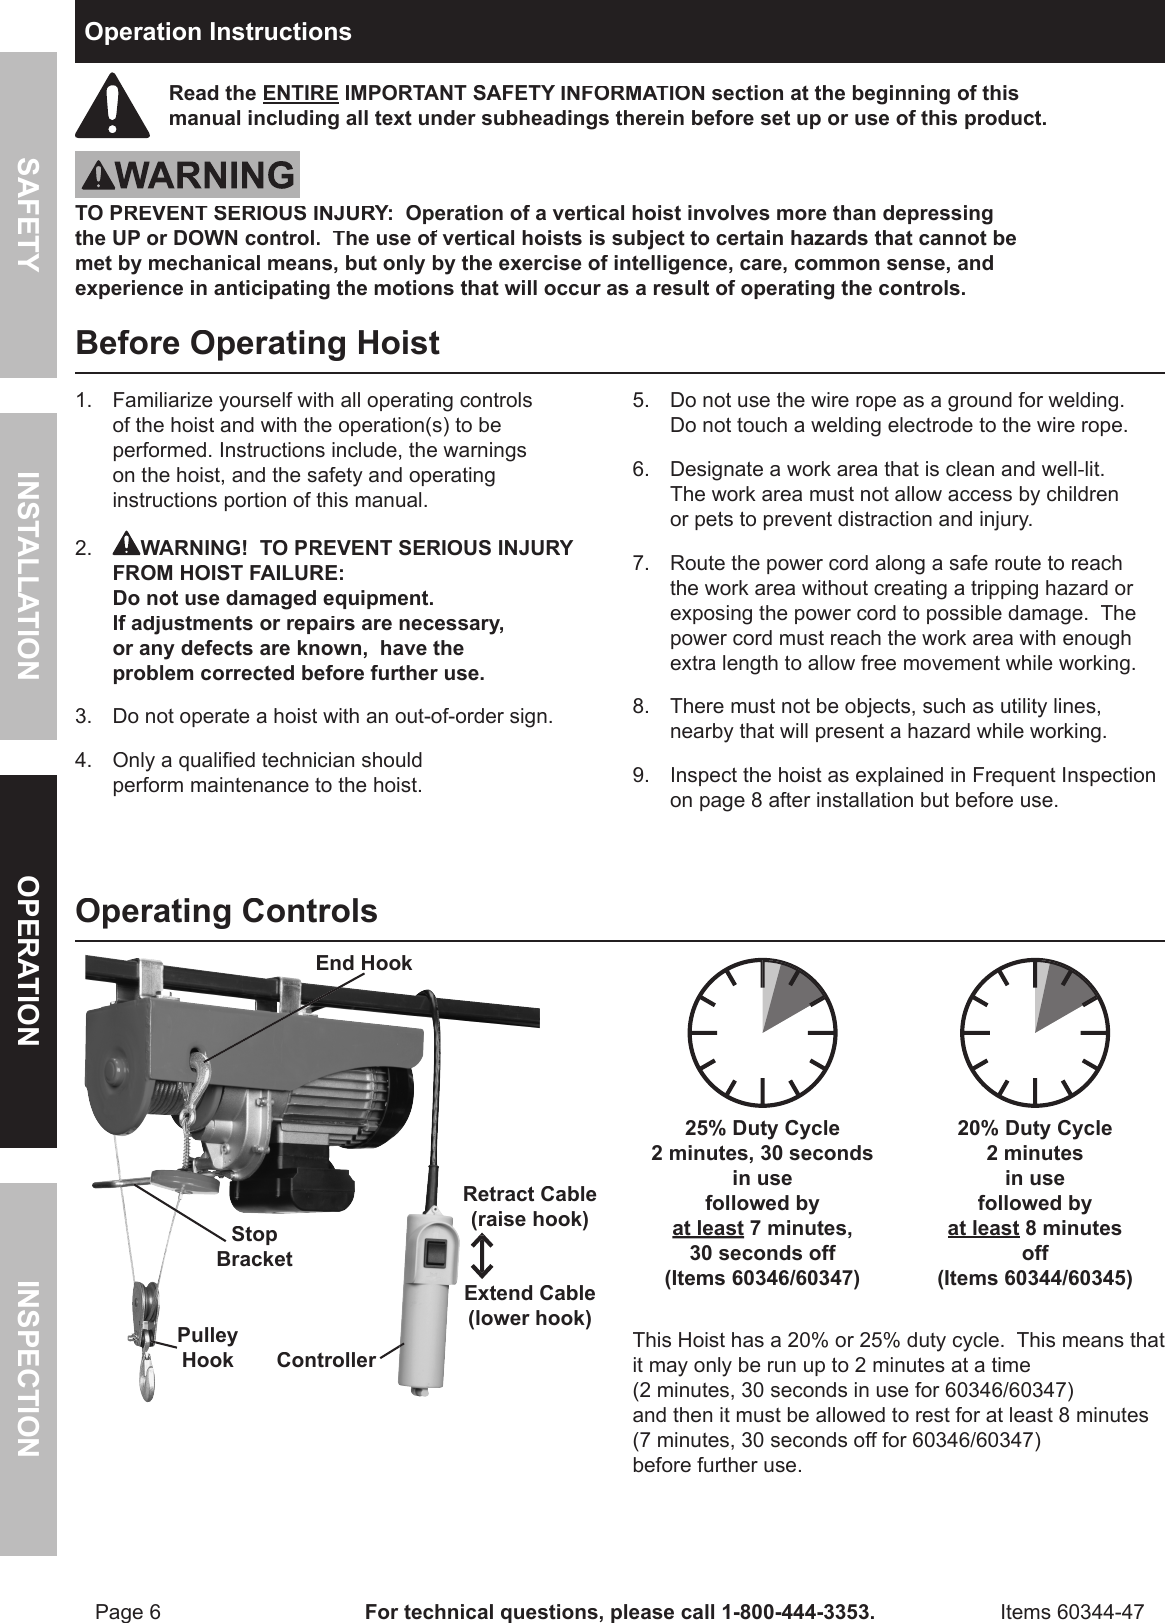 Page 6 of 12 - Harbor-Freight Harbor-Freight-1100-Lb-Electric-Hoist-With-Remote-Control-Product-Manual-  Harbor-freight-1100-lb-electric-hoist-with-remote-control-product-manual